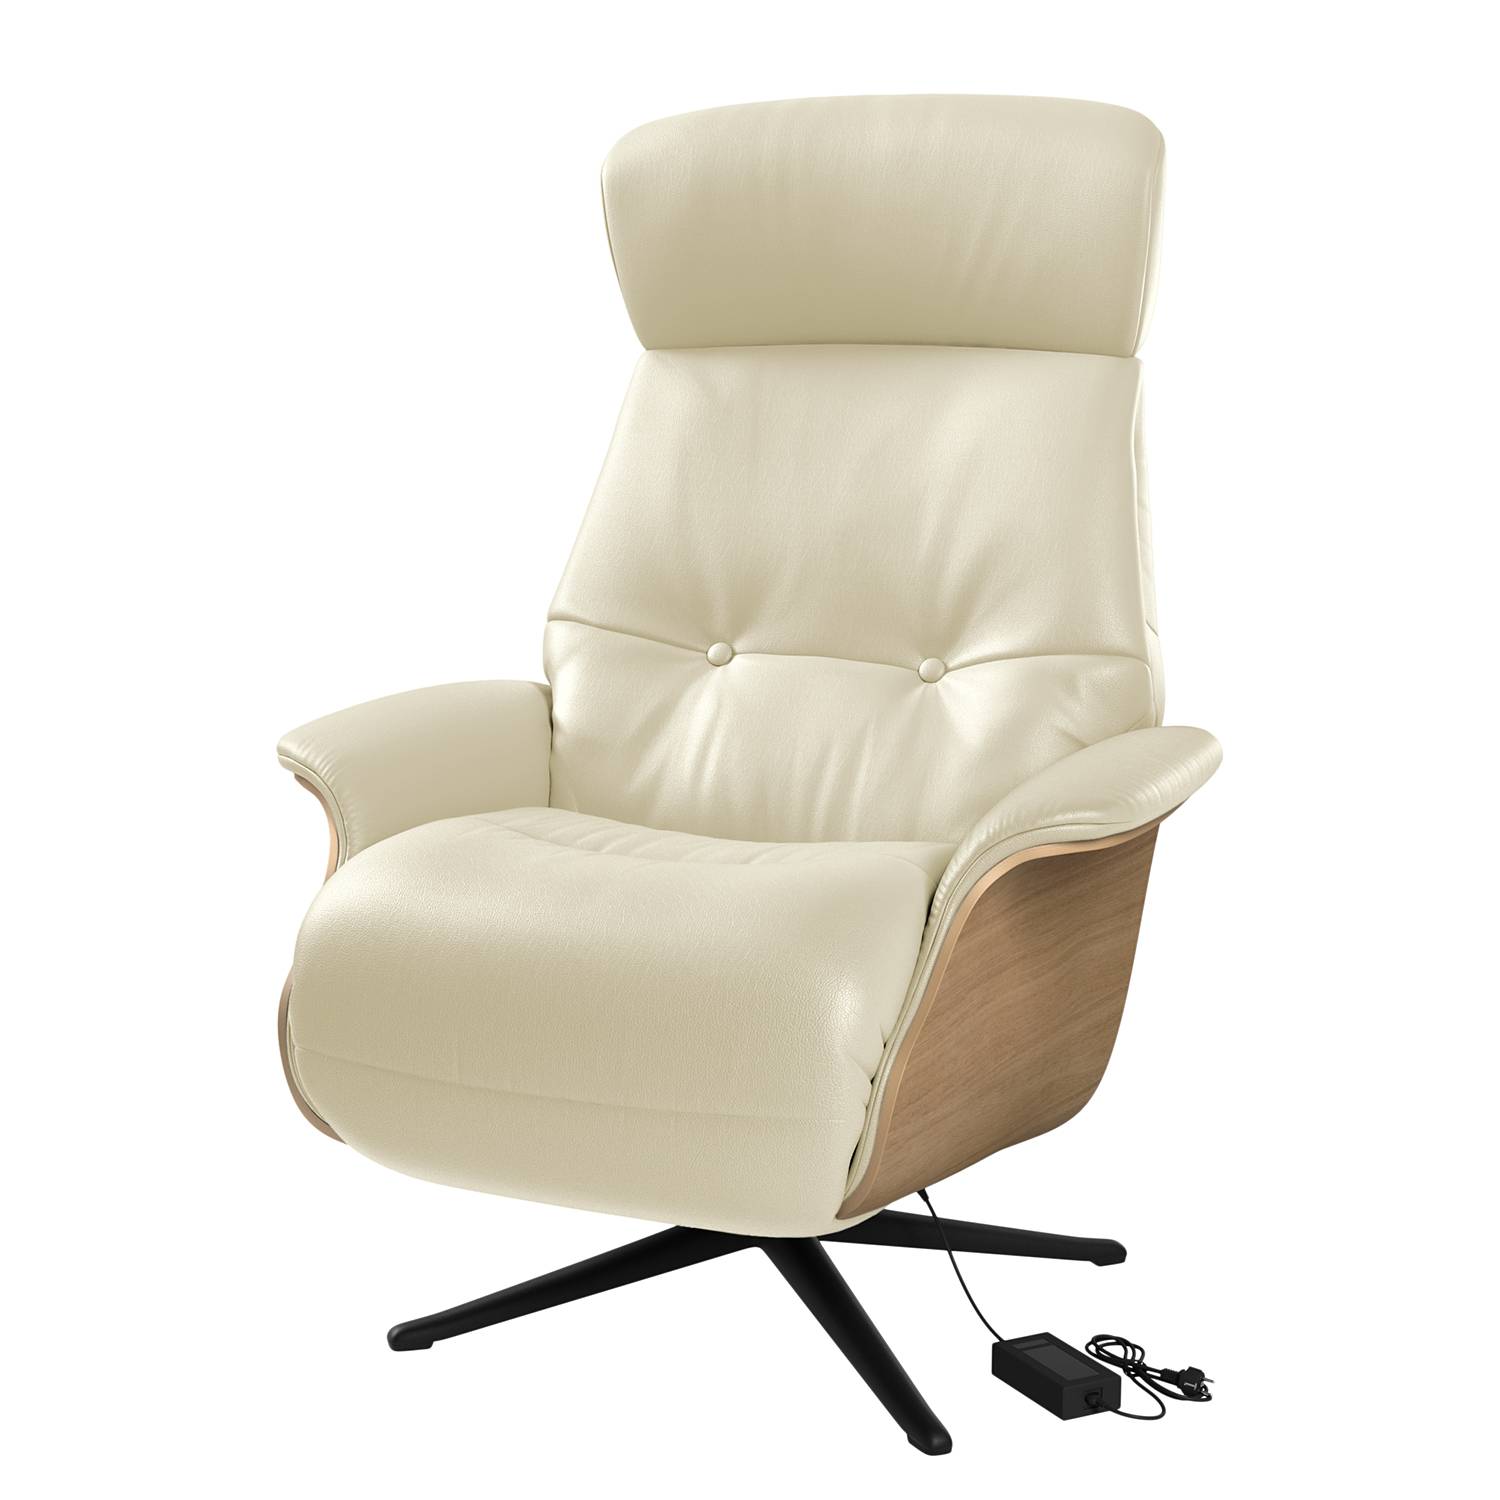 Image of Fauteuil relax Anderson VI 000000001000131425